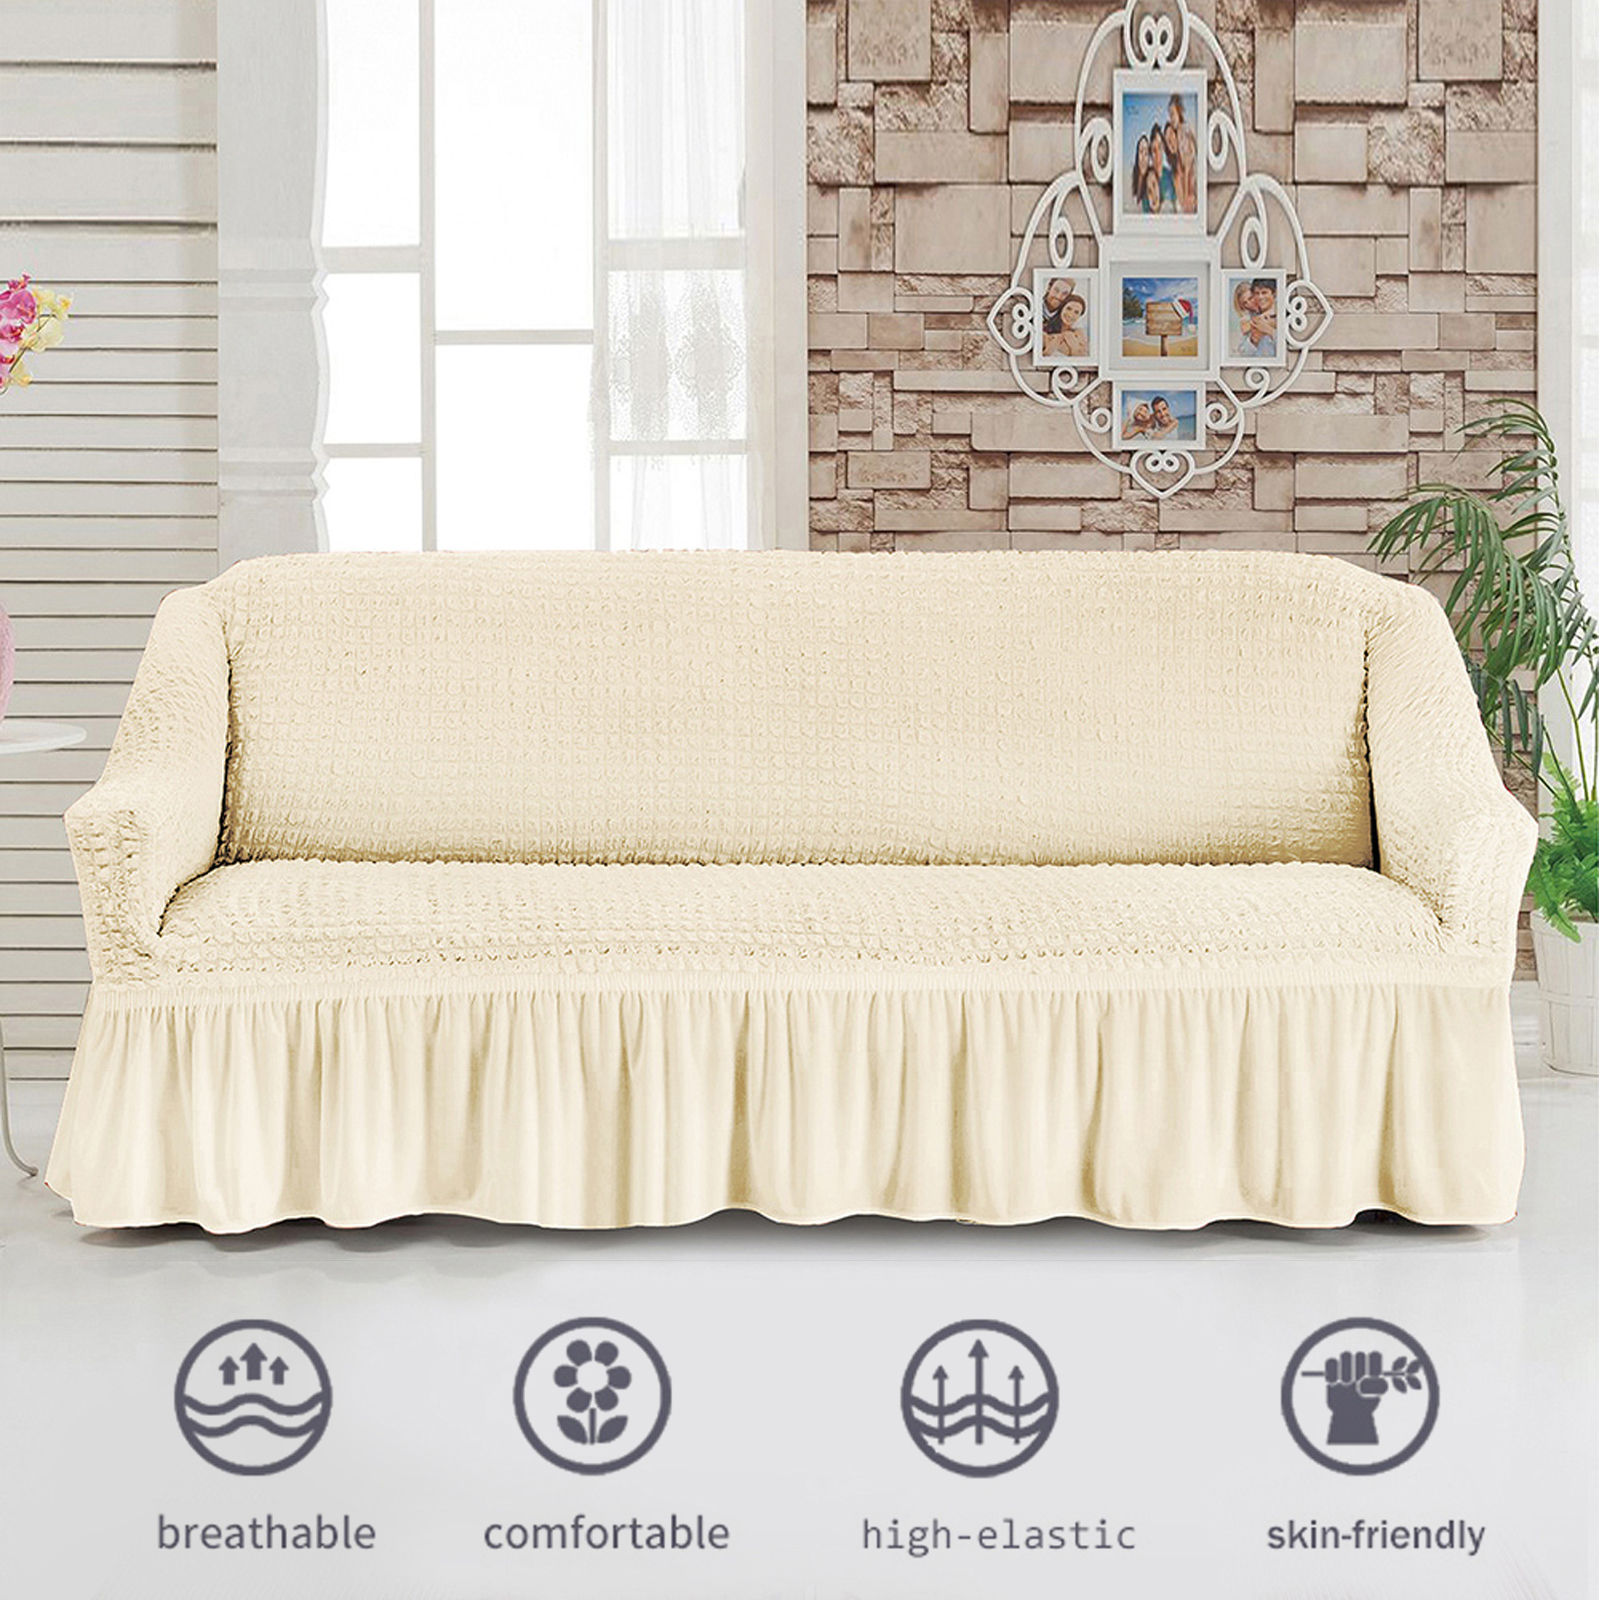 Stretch Sofa Slipcover, 3 Seater Sofa Slipcovers With Skirt With Armless Soft Sofa Cover Elastic Straps Sofa Slipcover For Living Room Kids Pets-white-X-Large